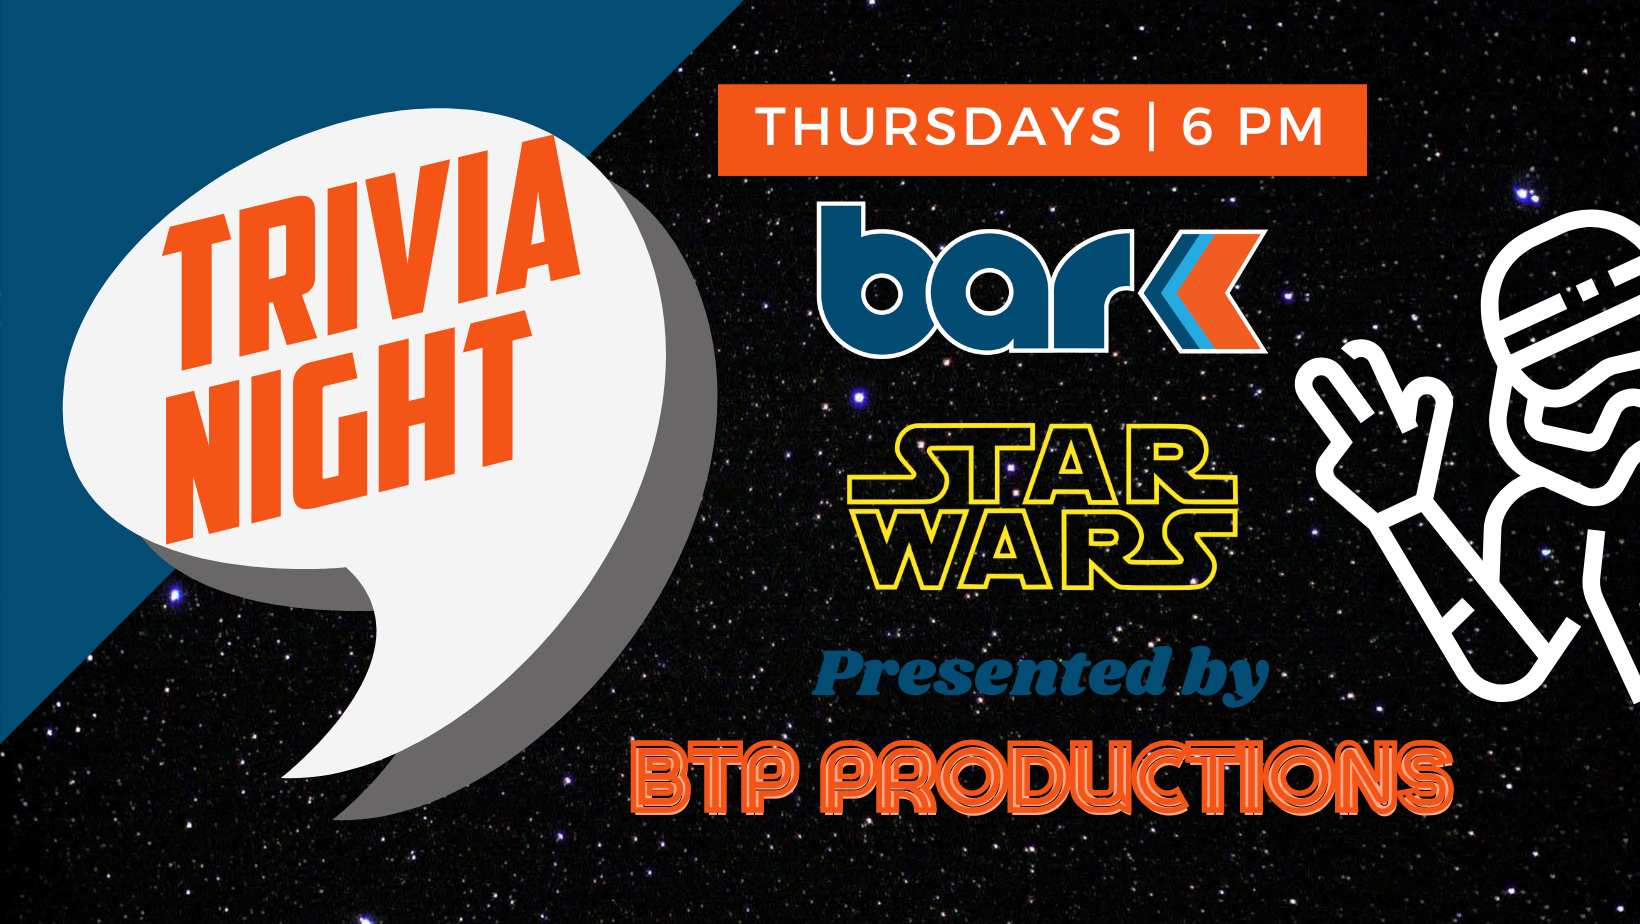 Bar K Star Wars Trivia night presented by STP Productions. Thursdays at 6pm